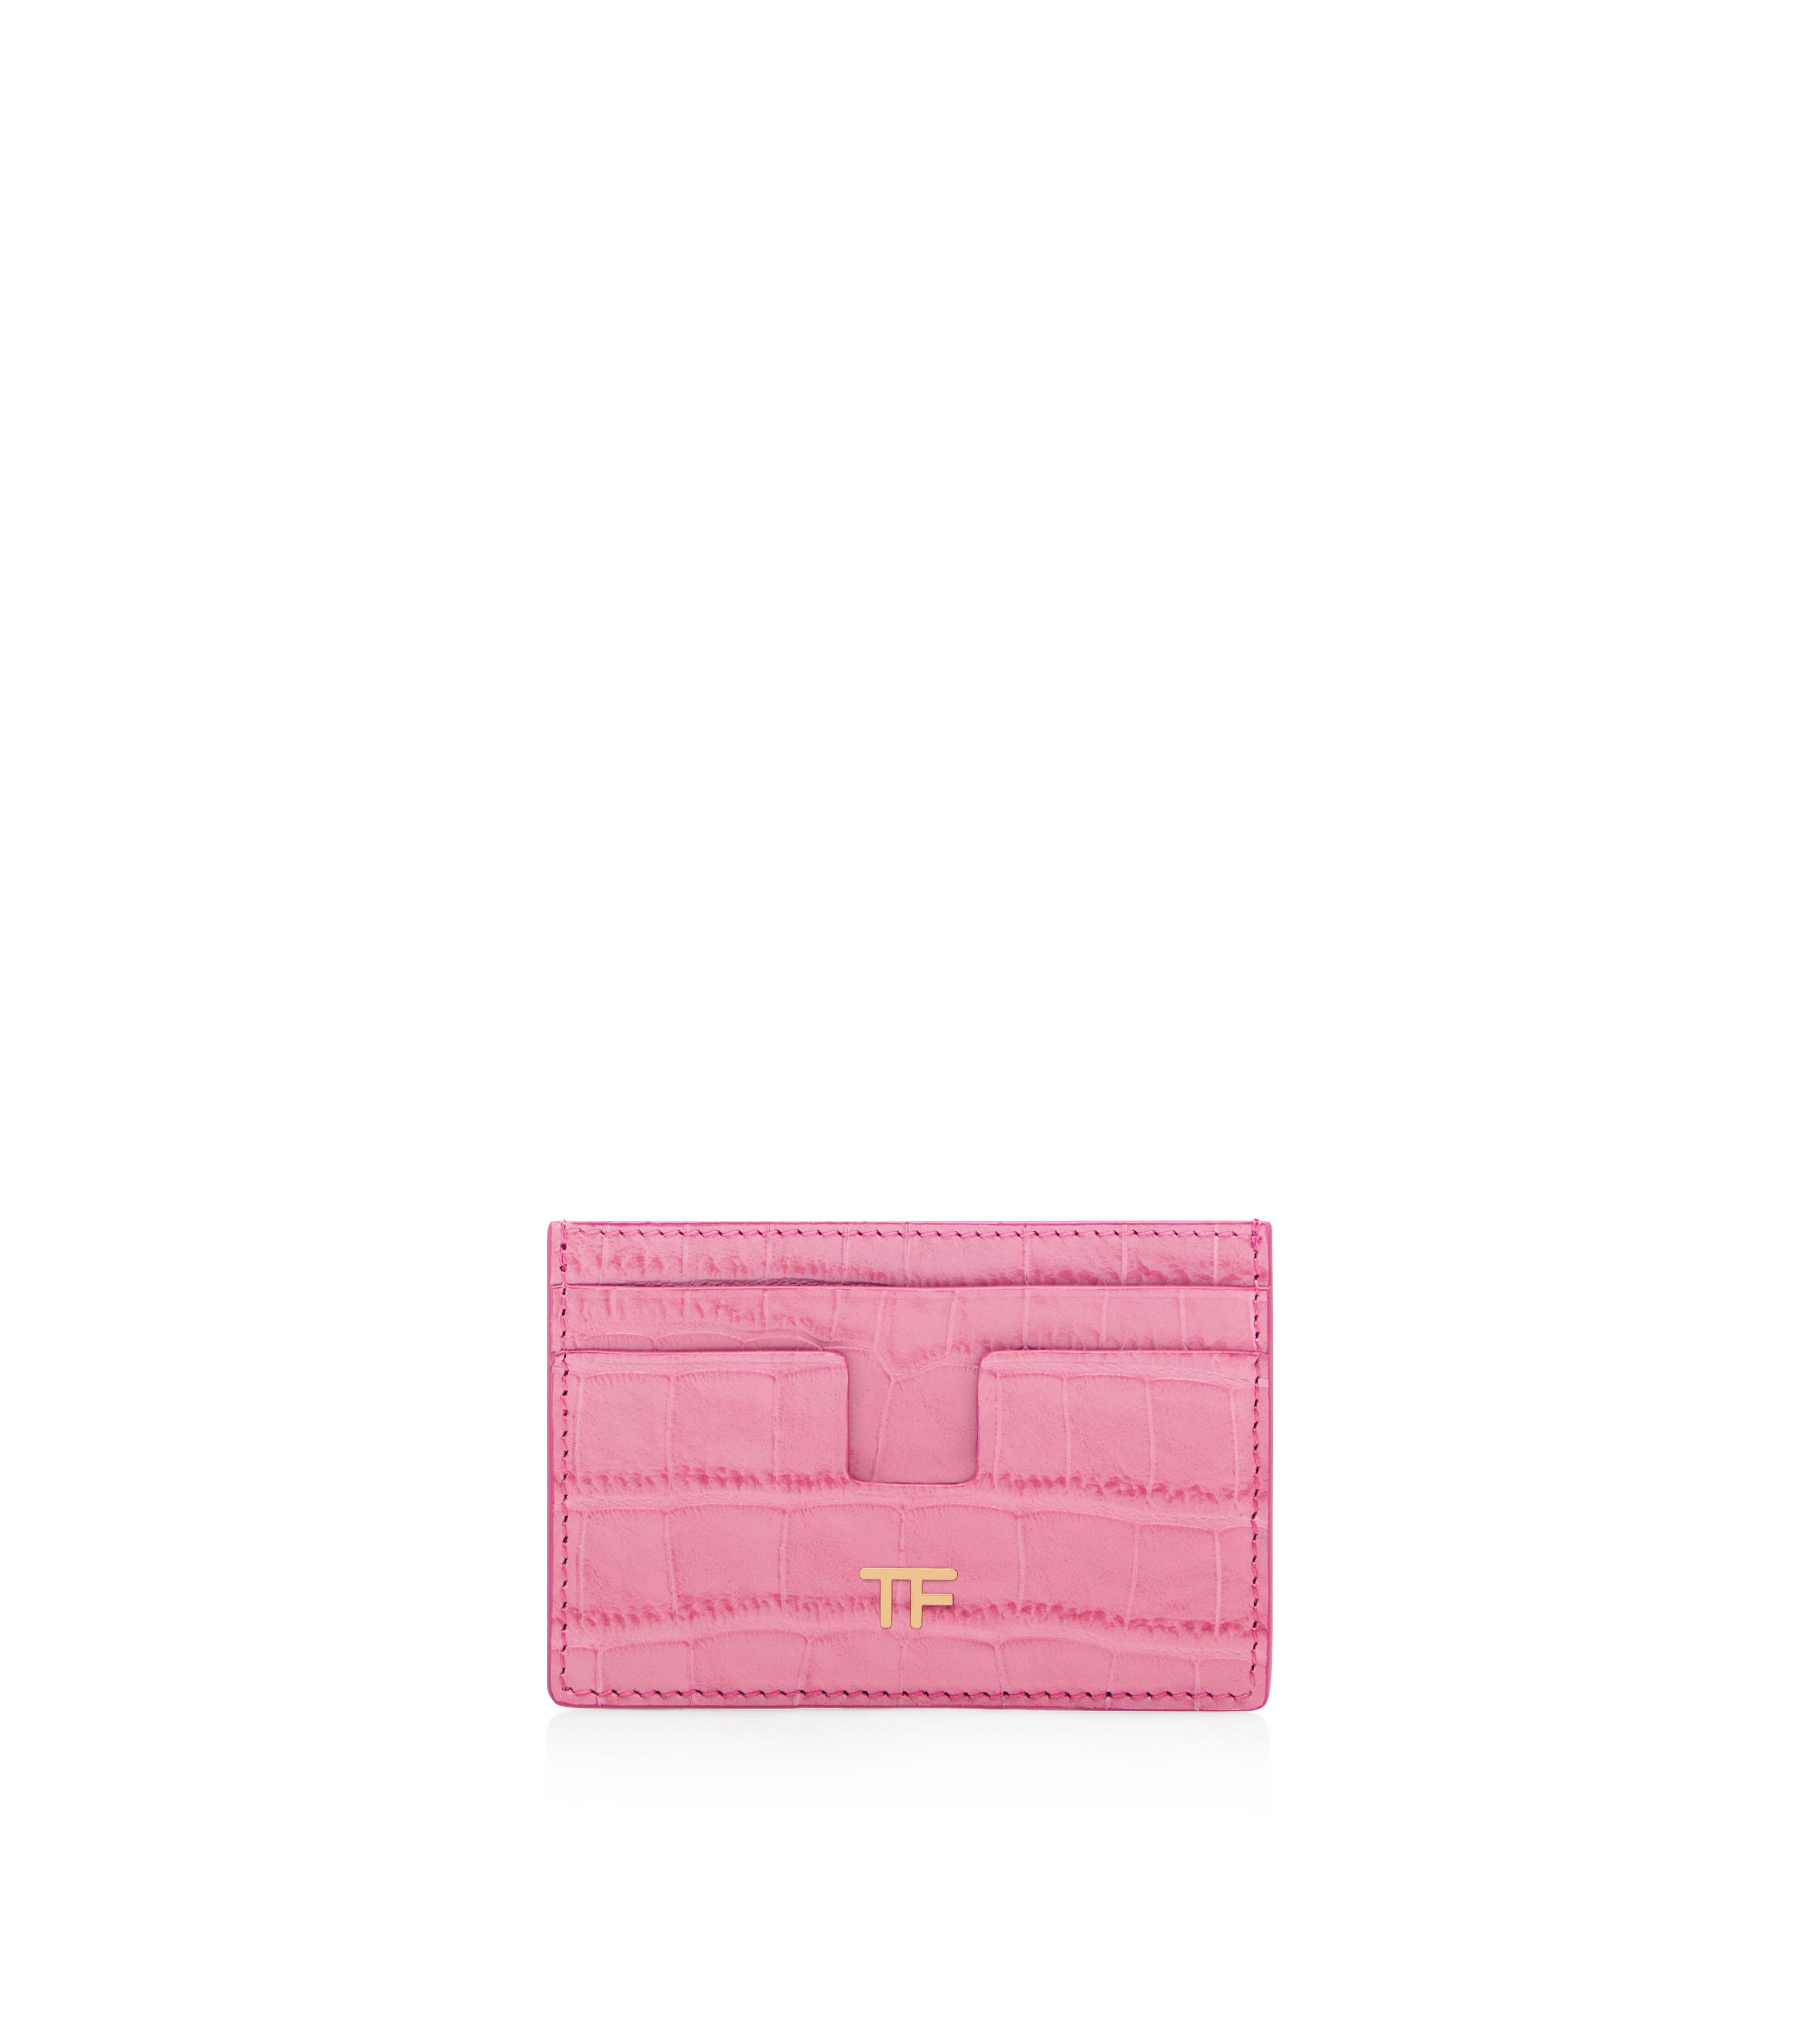 Accessories - TOM FORD | Women's Accessories | TomFord.co.uk